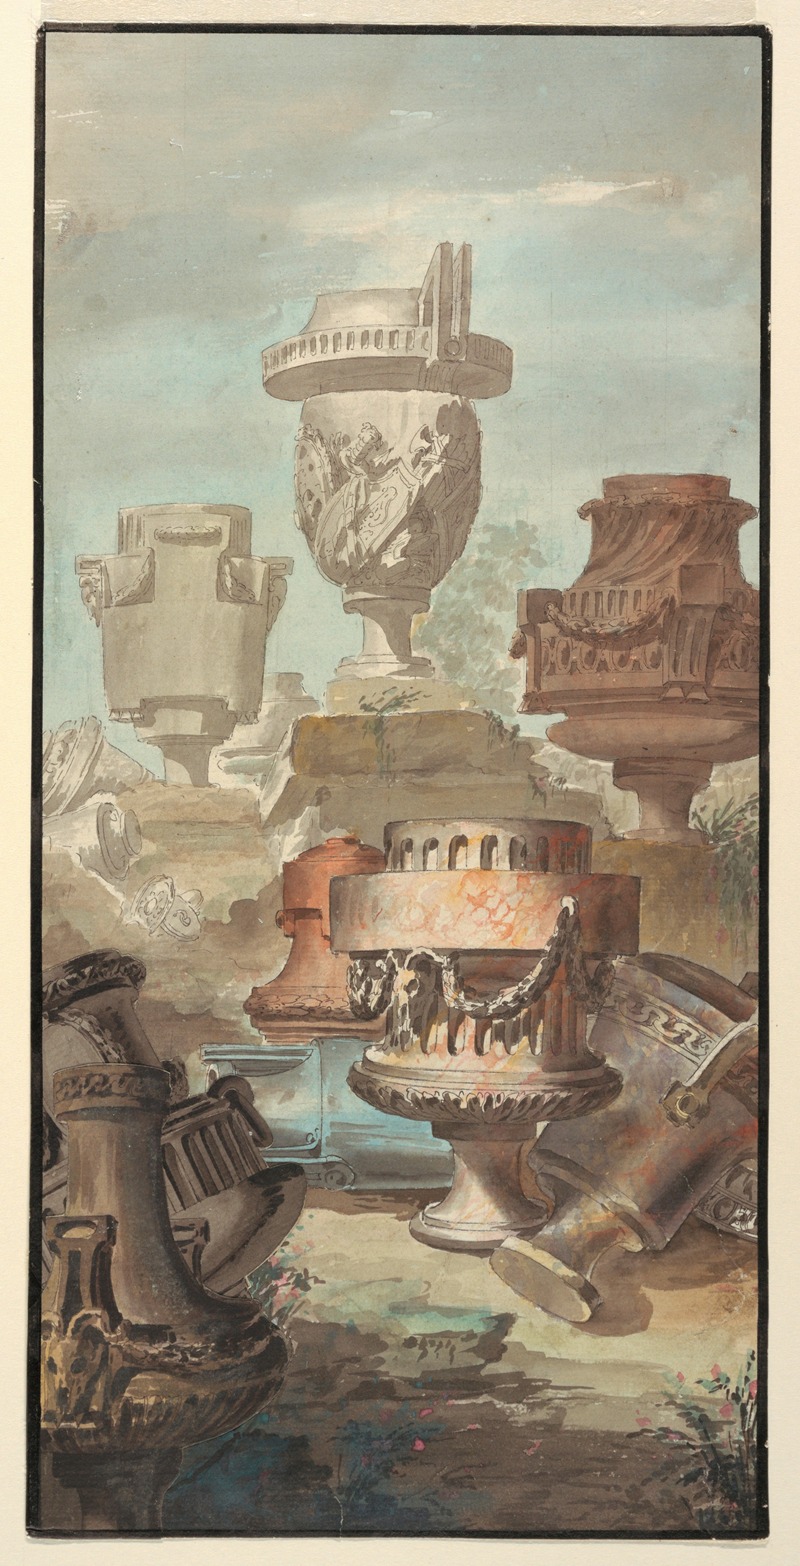 Jean-Charles Delafosse - Ruin Fantasy; Vases and Urns